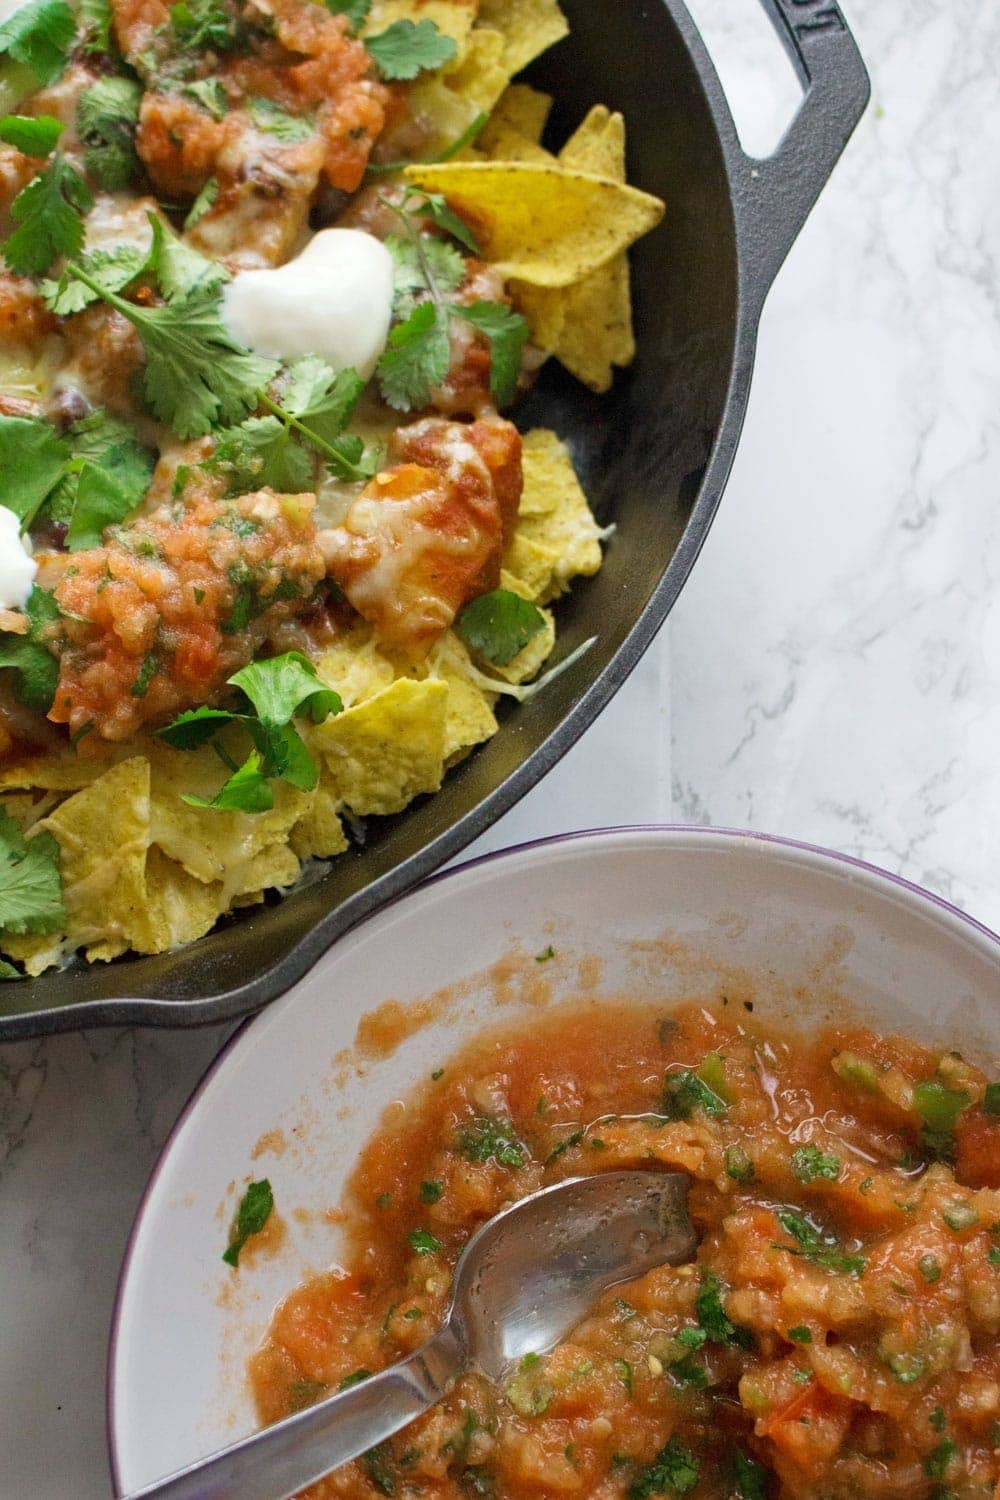 This healthy butternut squash chilli makes the perfect topping for these vegetarian nachos. Add all your favourite toppings for a delicious twist on a classic!